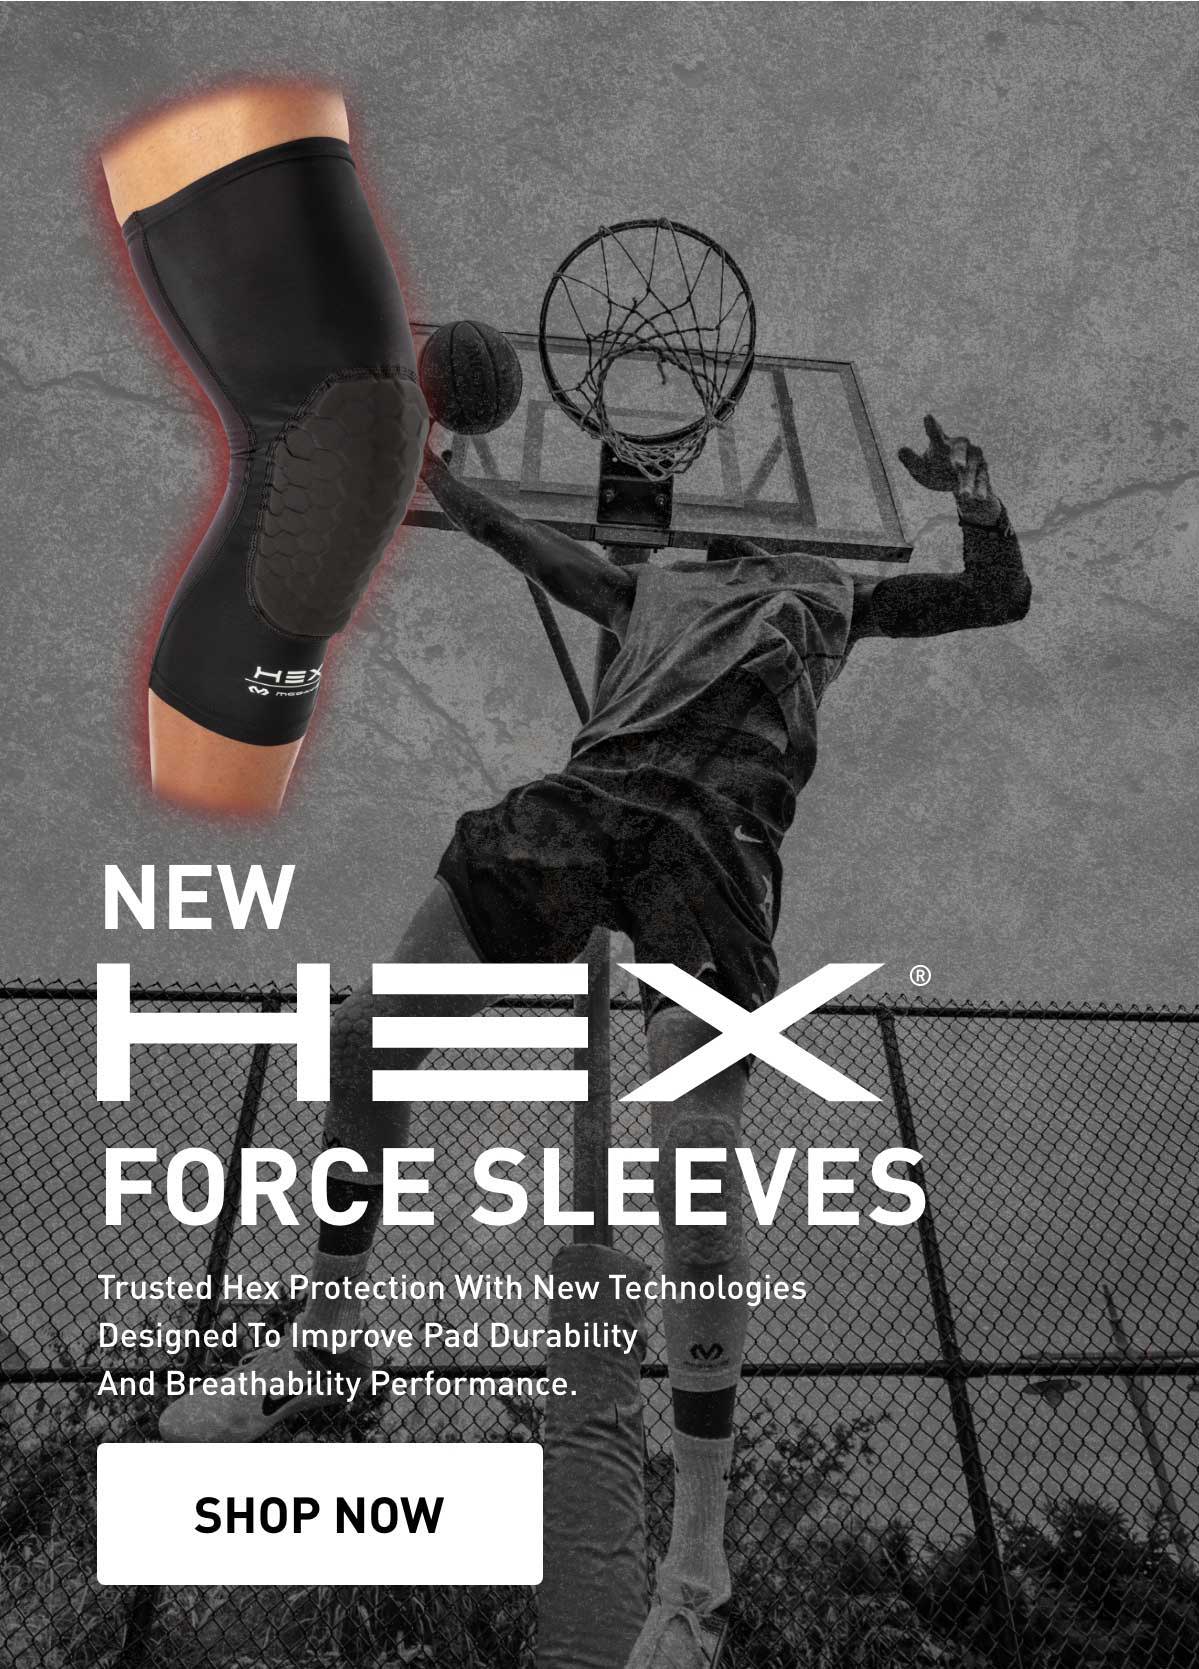 NEW HEX Force Sleeves - Trusted Hex Protection With New Technologies Designed To Improve Pad Durability And Breathability Performance.